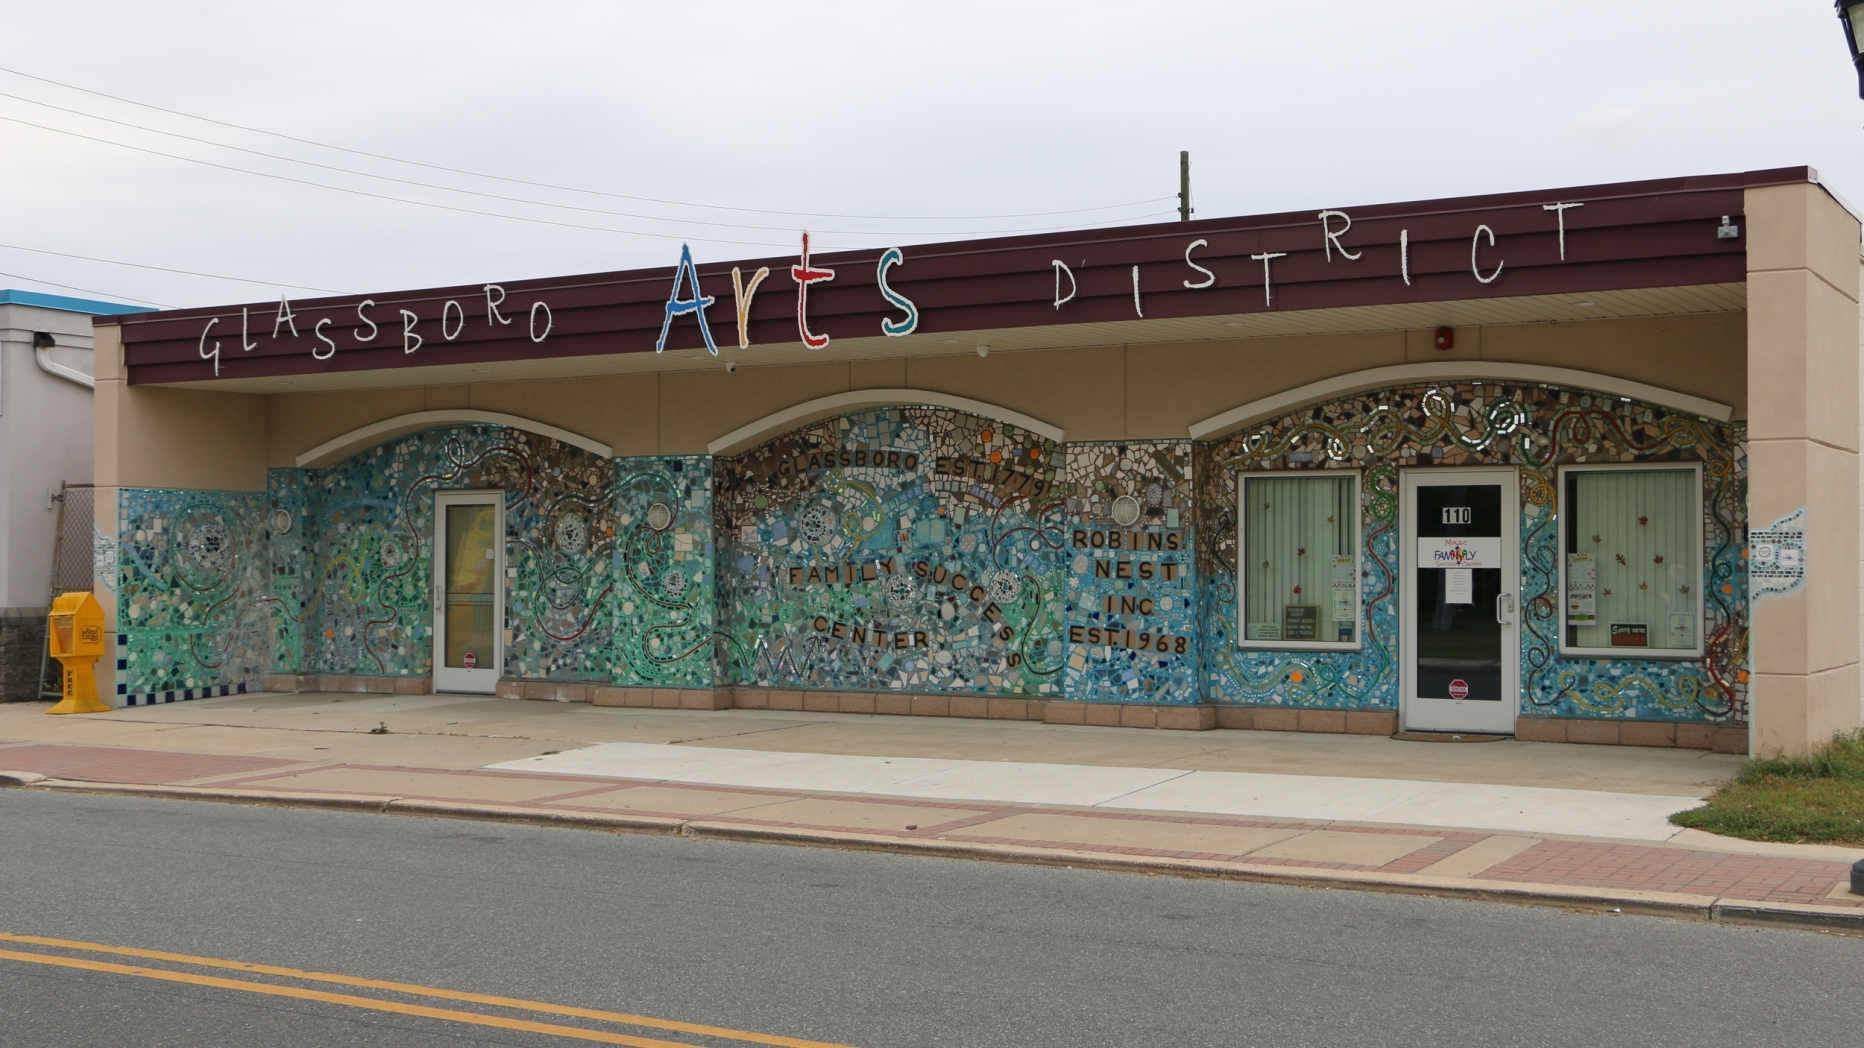 Building covered in turquoise mosaic with sign saying Glassboro Arts District